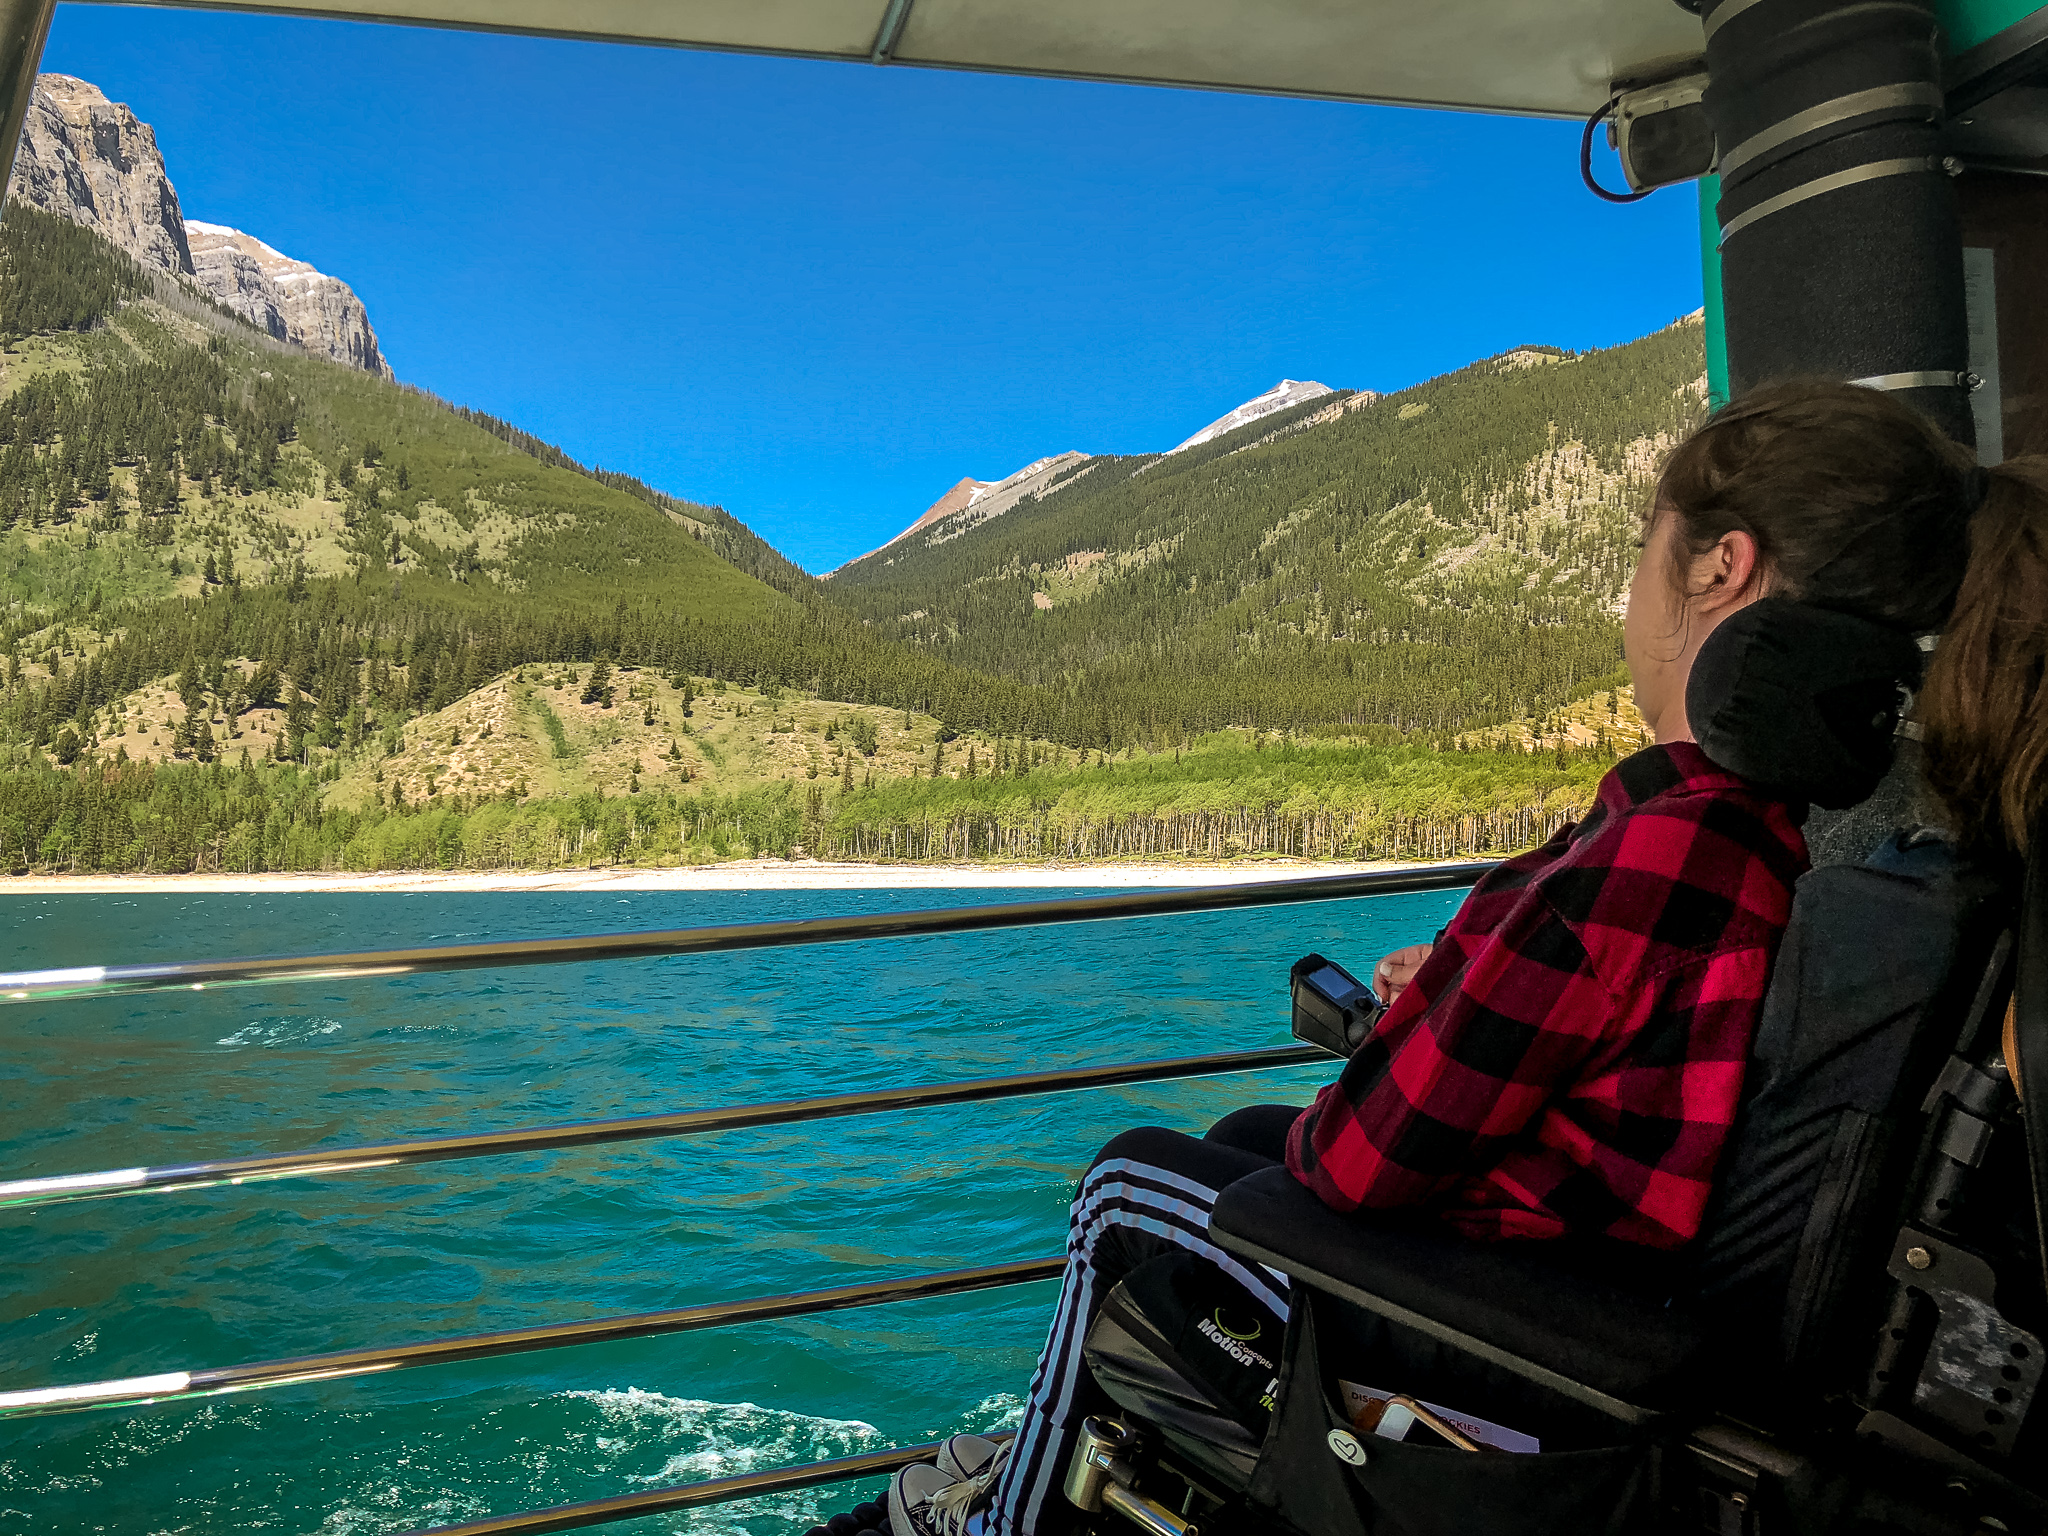 Tori sitting in her wheelchair on the Lake Minnewanka boat cruise. The water is a bright turquoise blue and there are luscious green mountains in the background